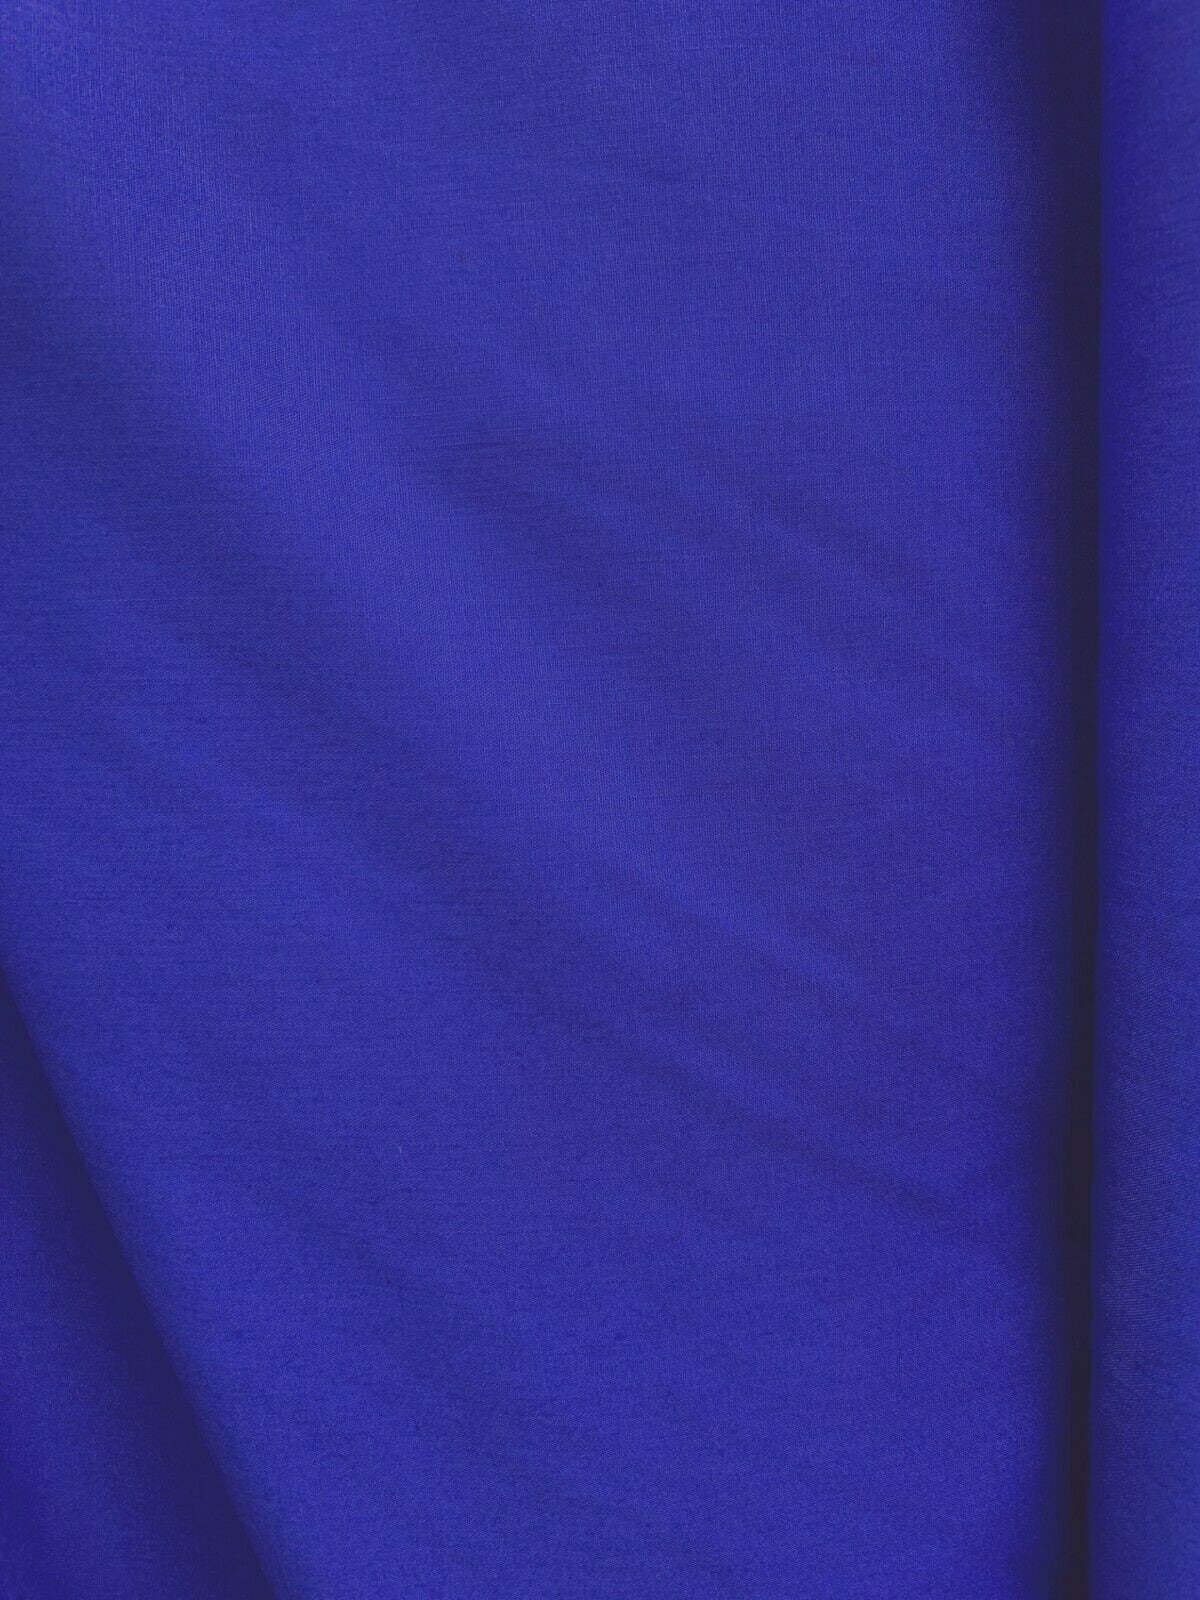 ROYAL BLUE Light Weight Cotton Fabric (58 in.) Sold By The Yard